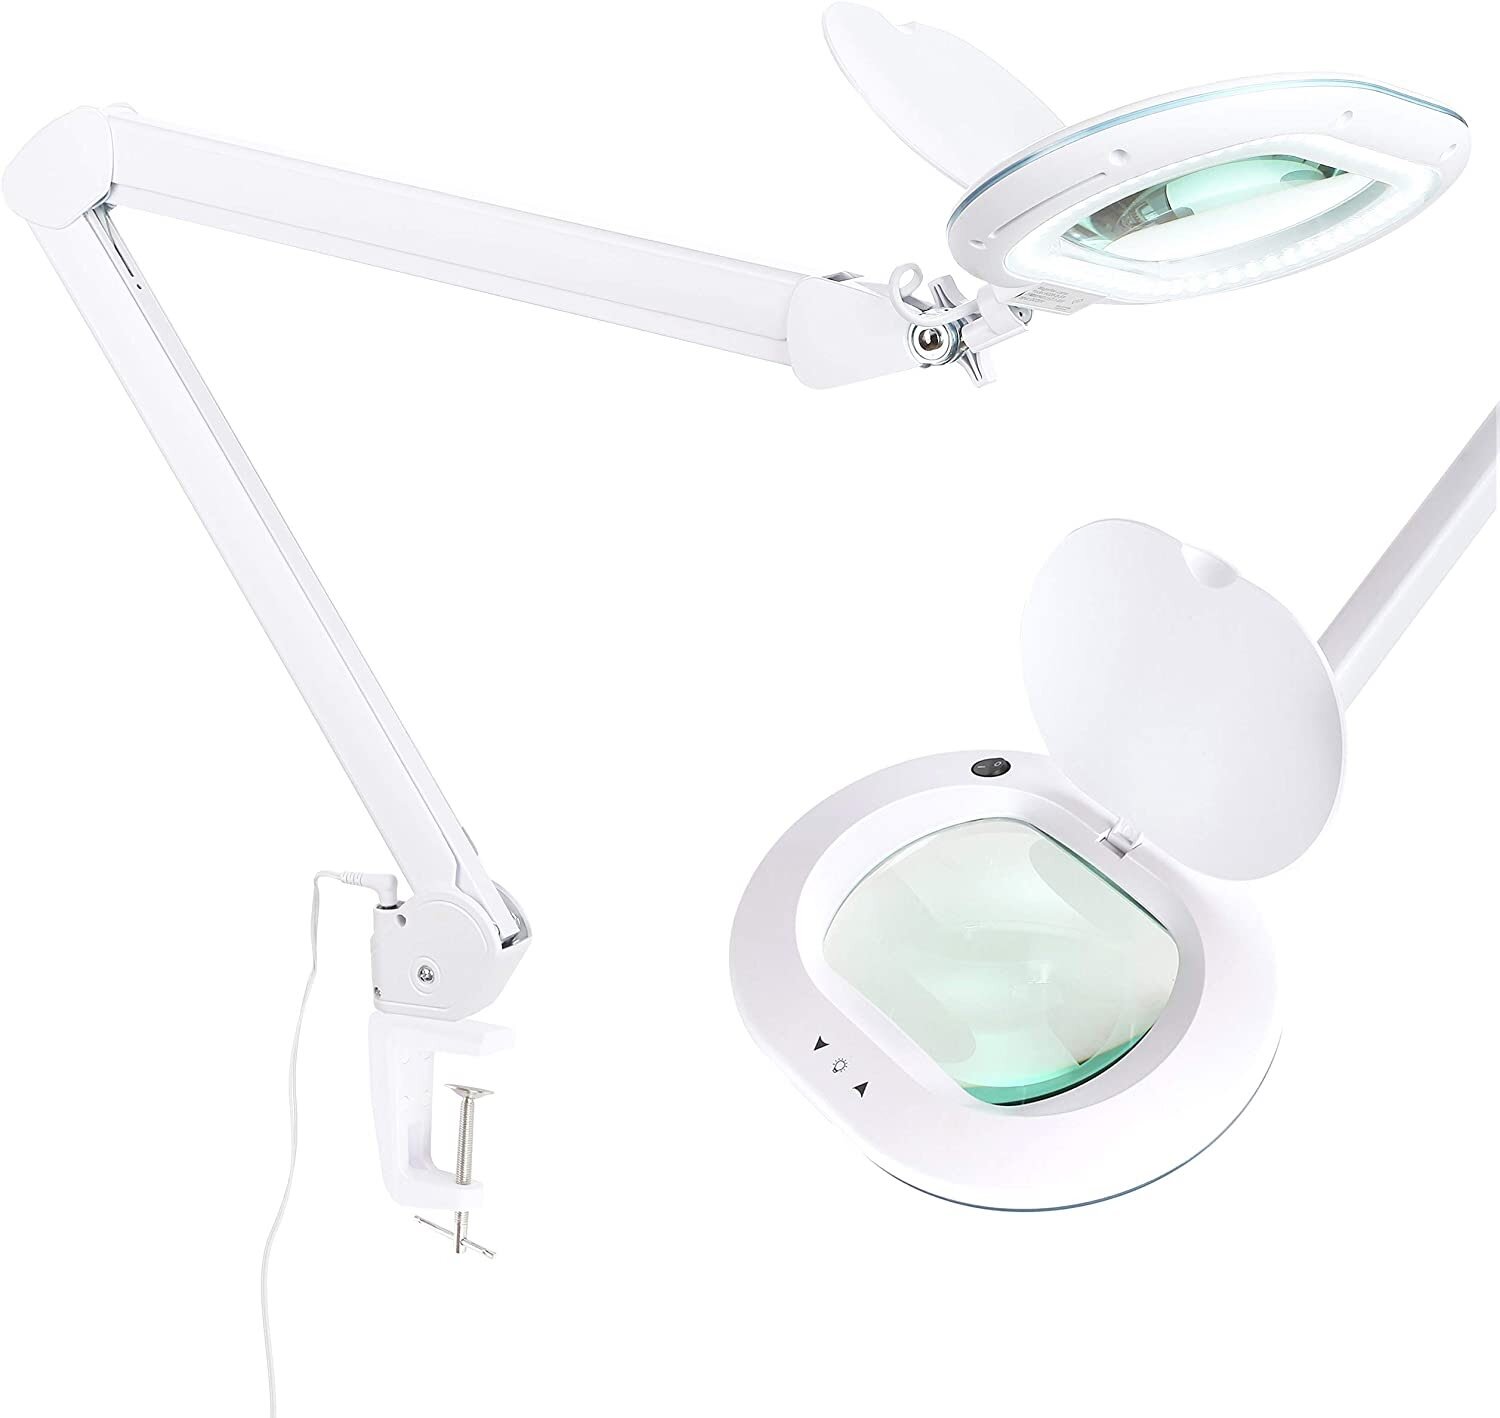 Brightech LightView Pro LED Magnifying Lamp - Black